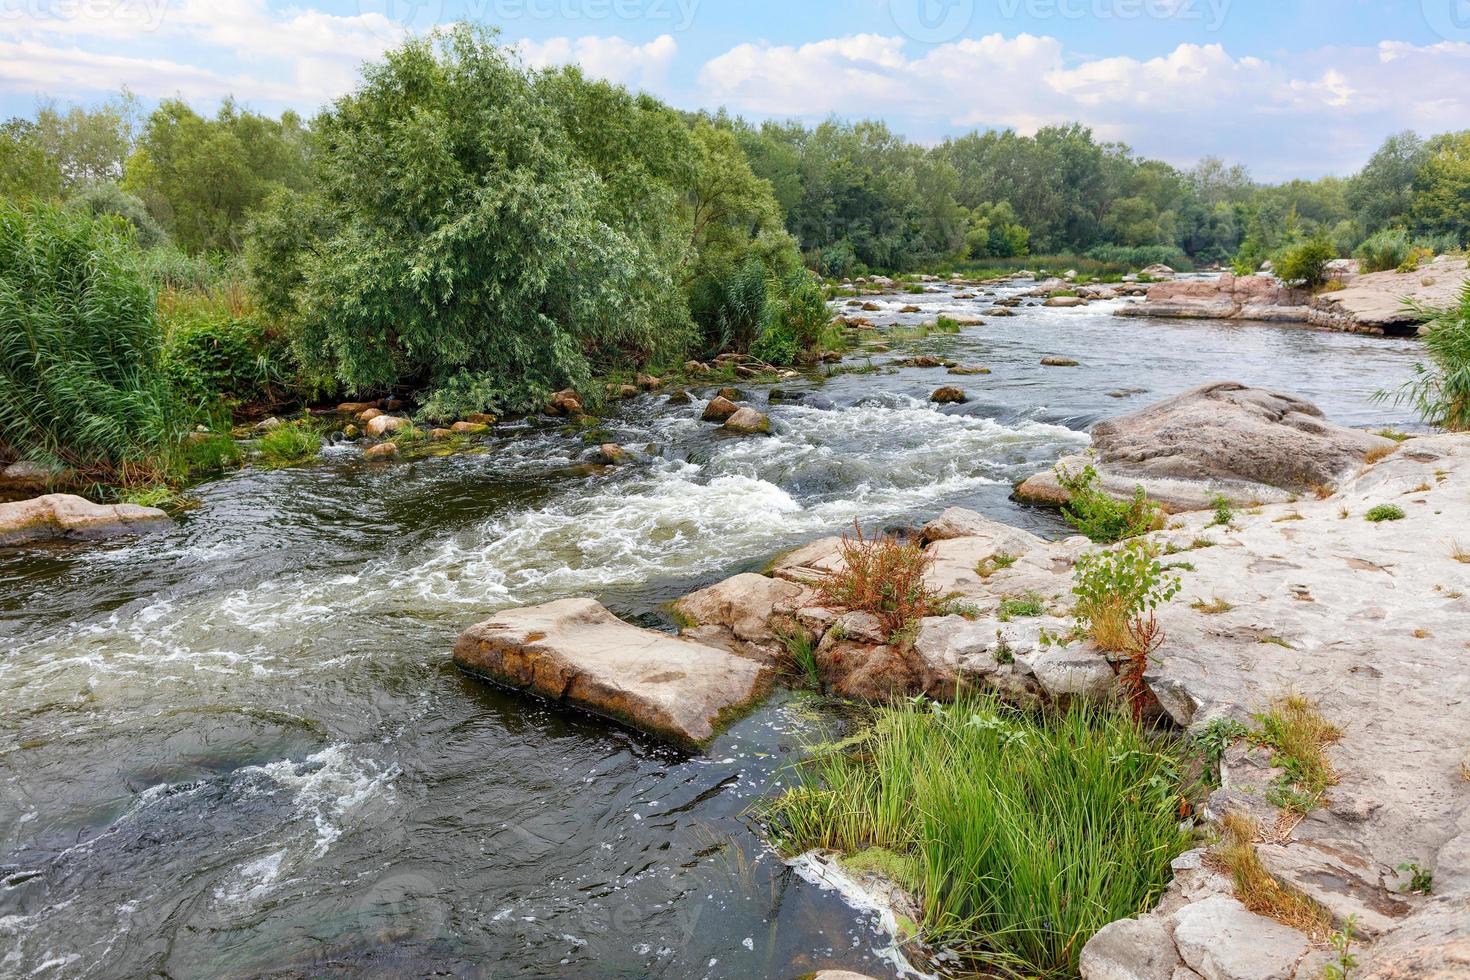 The rapid flow of the river between rocky banks with stone rapids and greenery in a summer landscape. photo